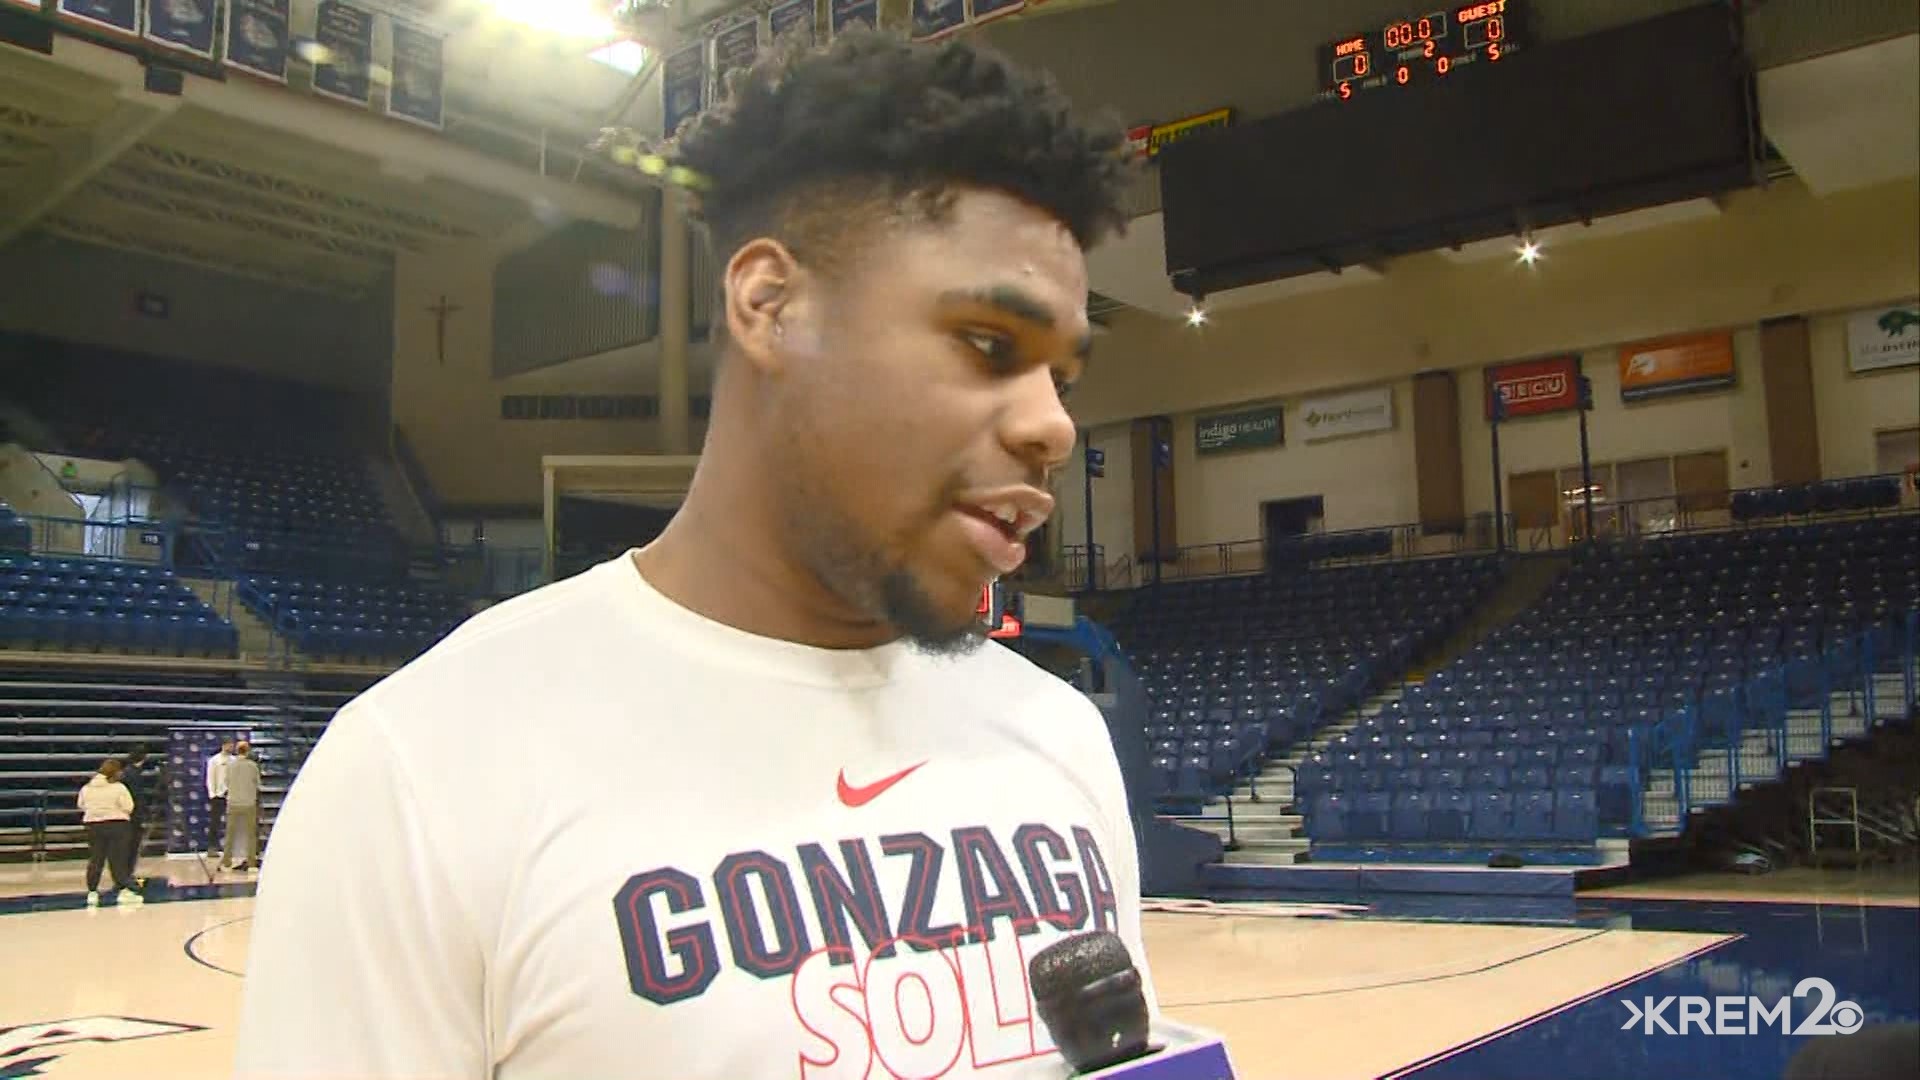 Gonzaga guard Malachi Smith talks with KREM 2 Sports about preparing for his first NCAA Tournament run with the BUlldogs.